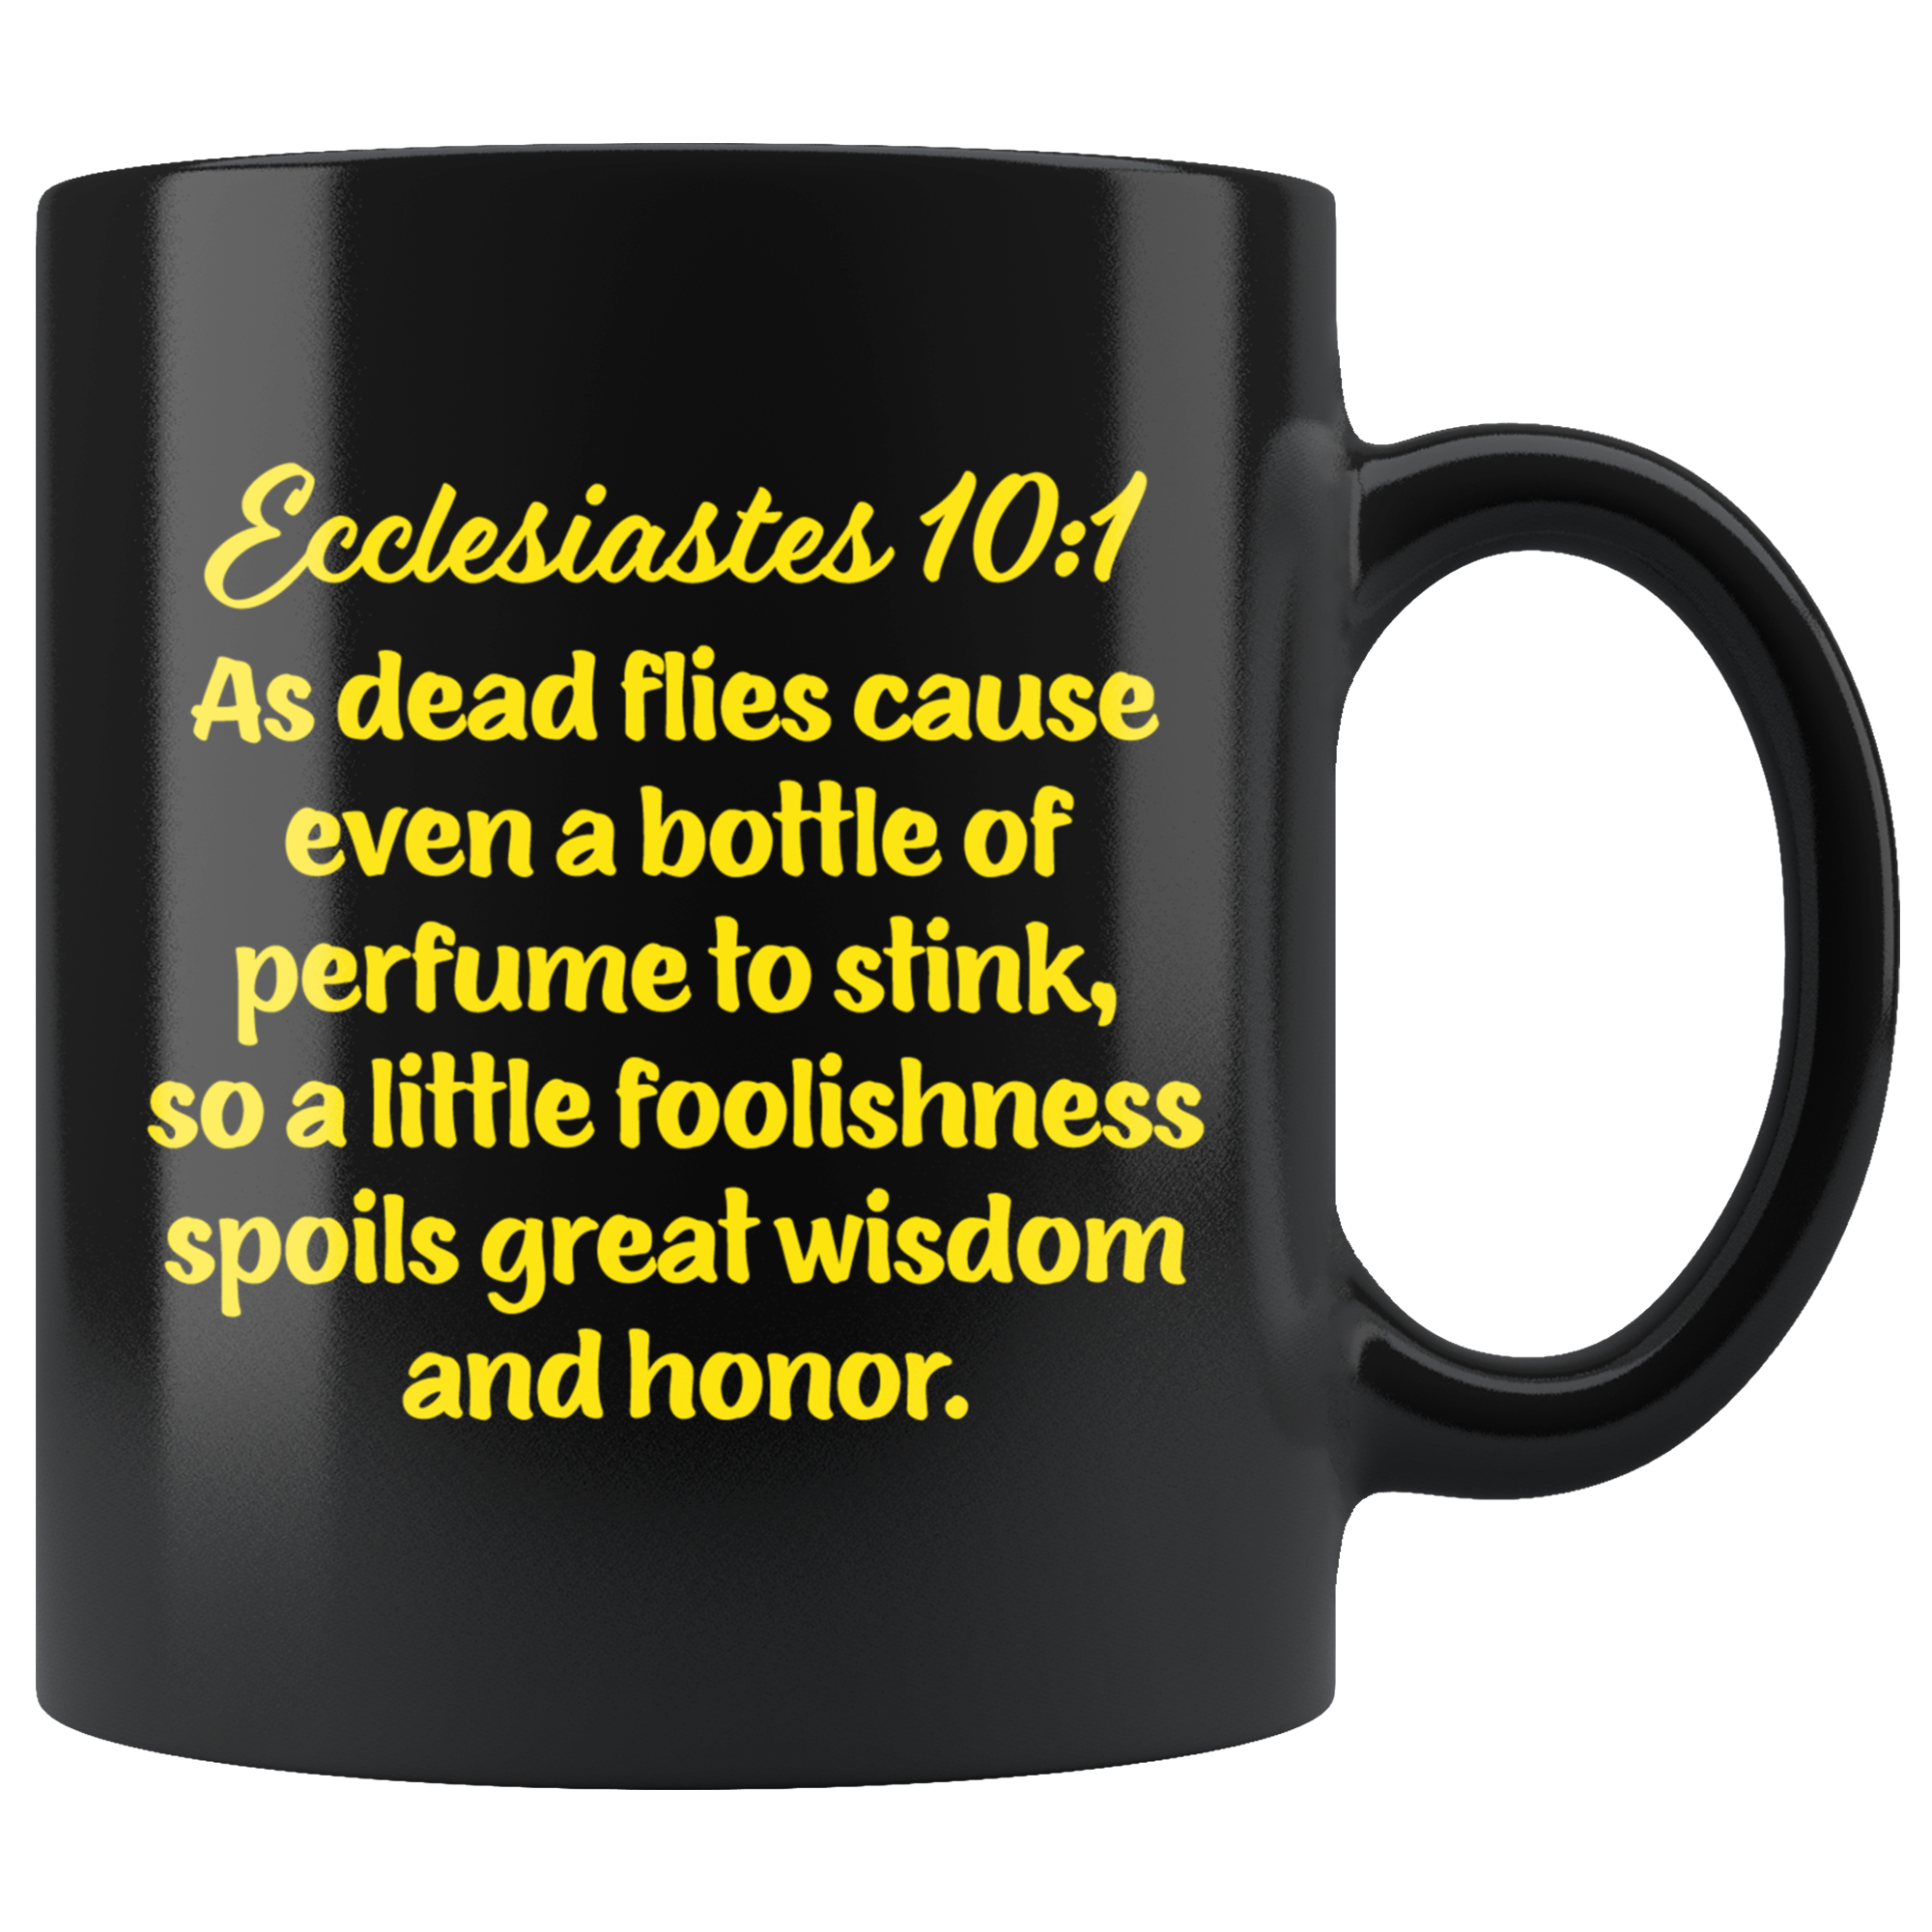 ECCLESIASTES 10:1  -"... a little foolishness spoils great wisdom and honor."